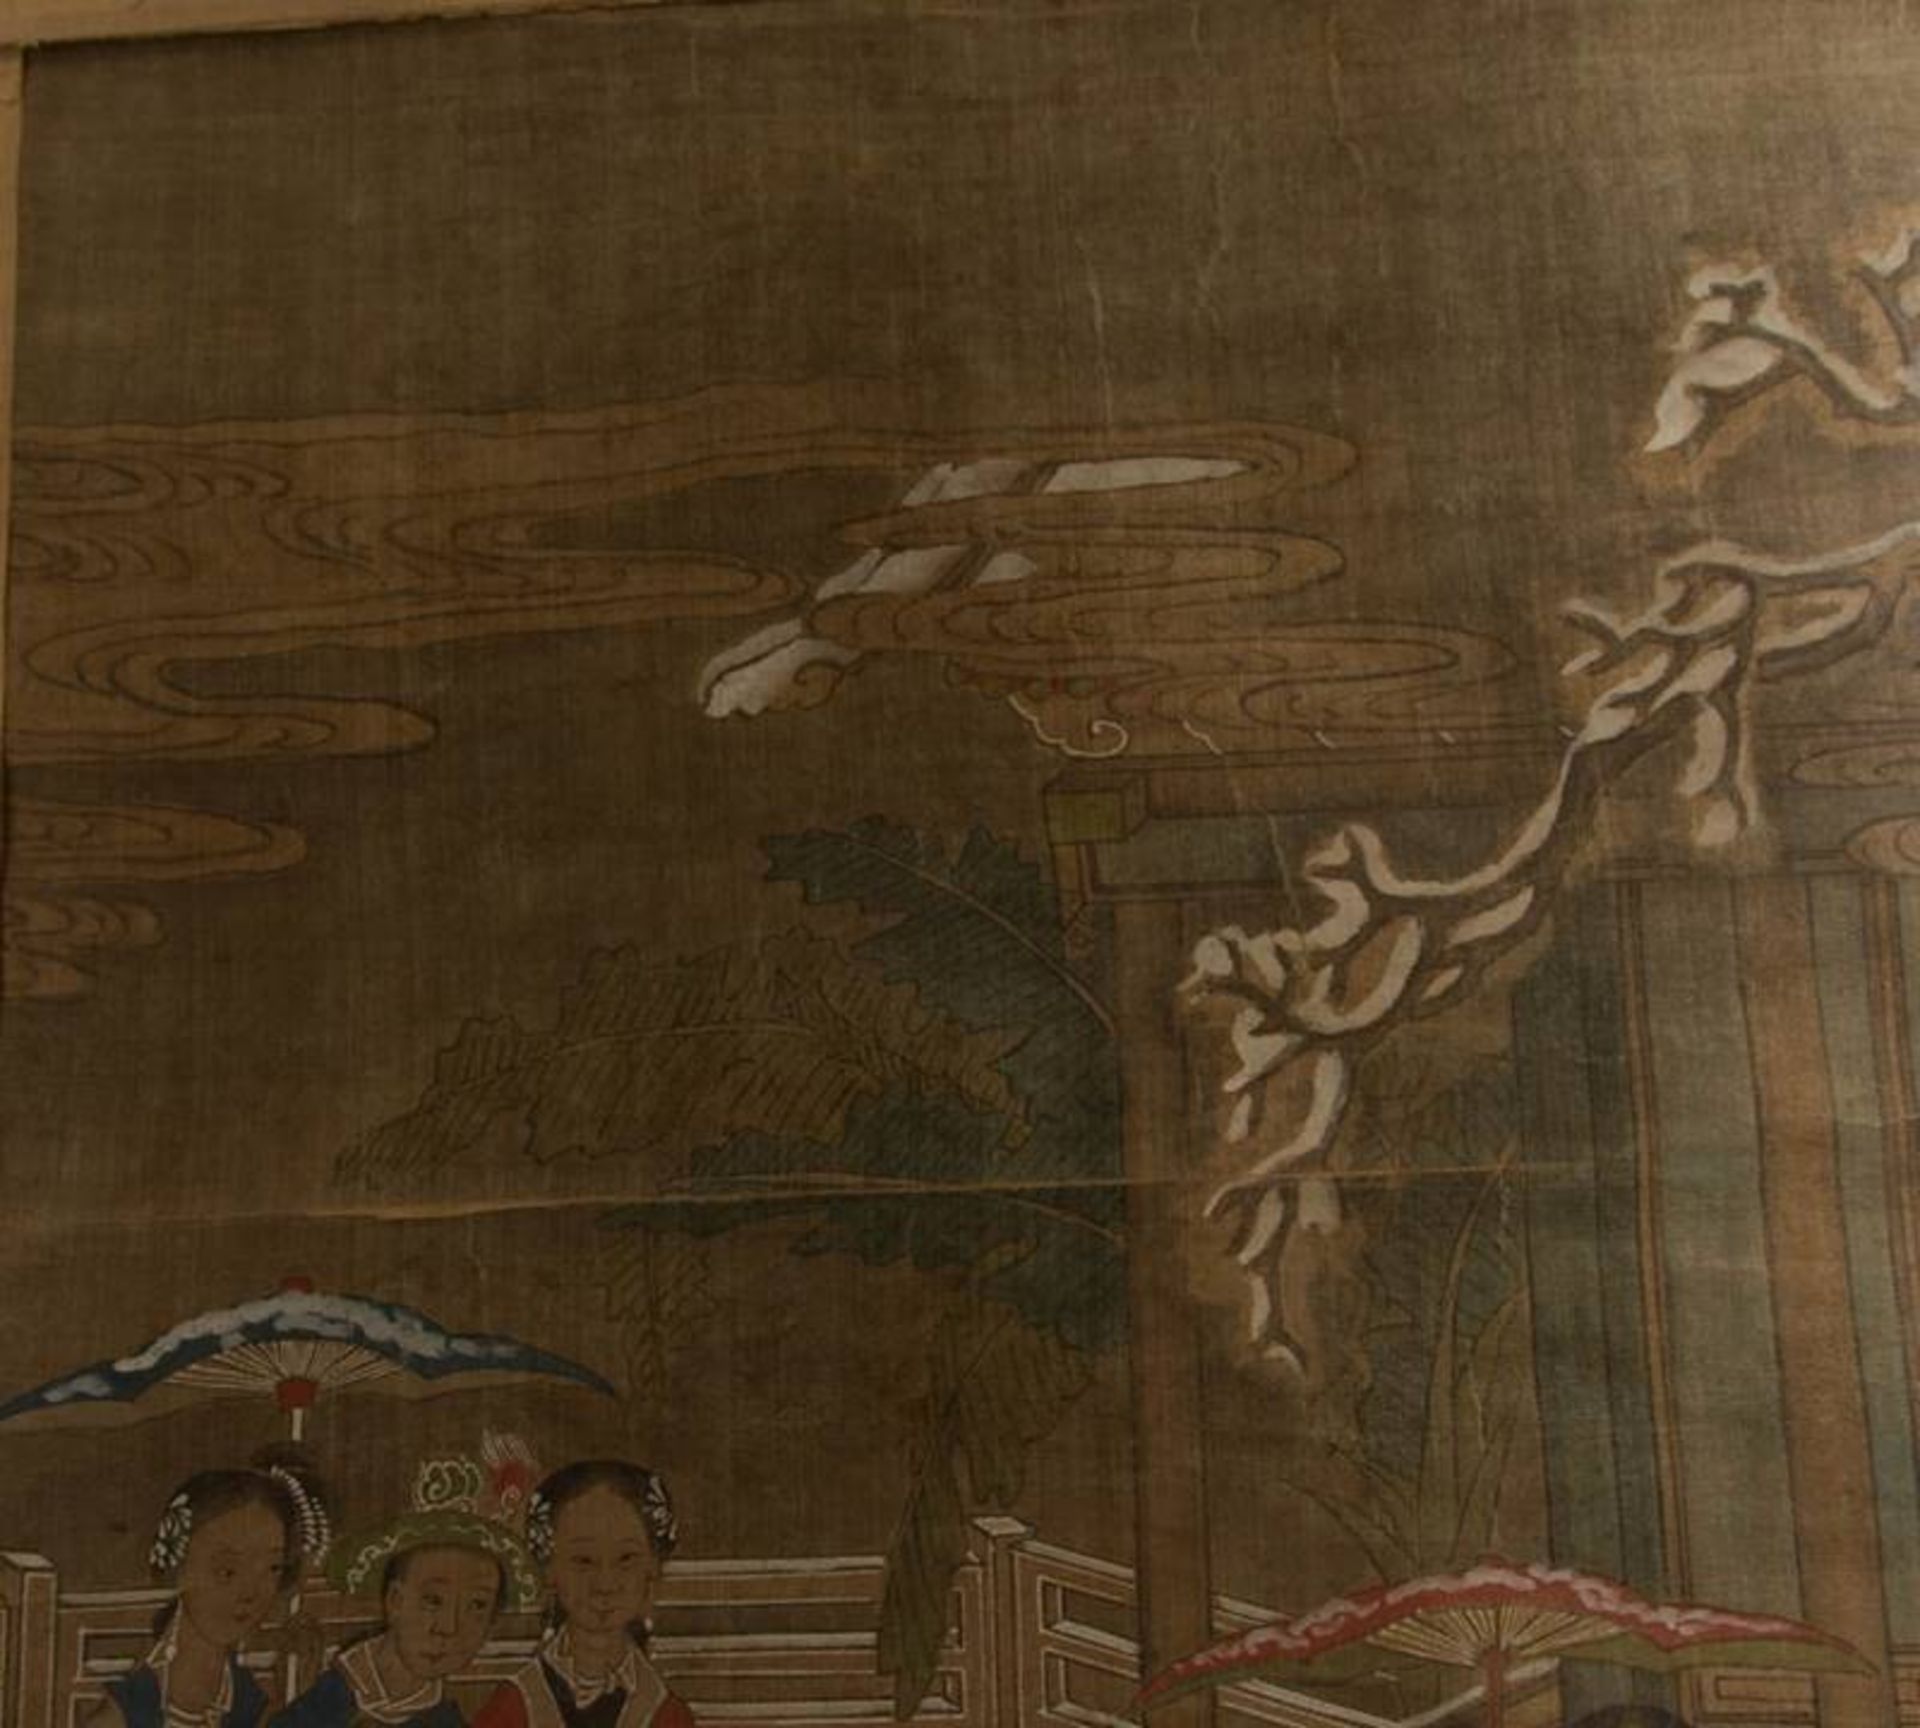 Japanese scroll painting - Image 5 of 8